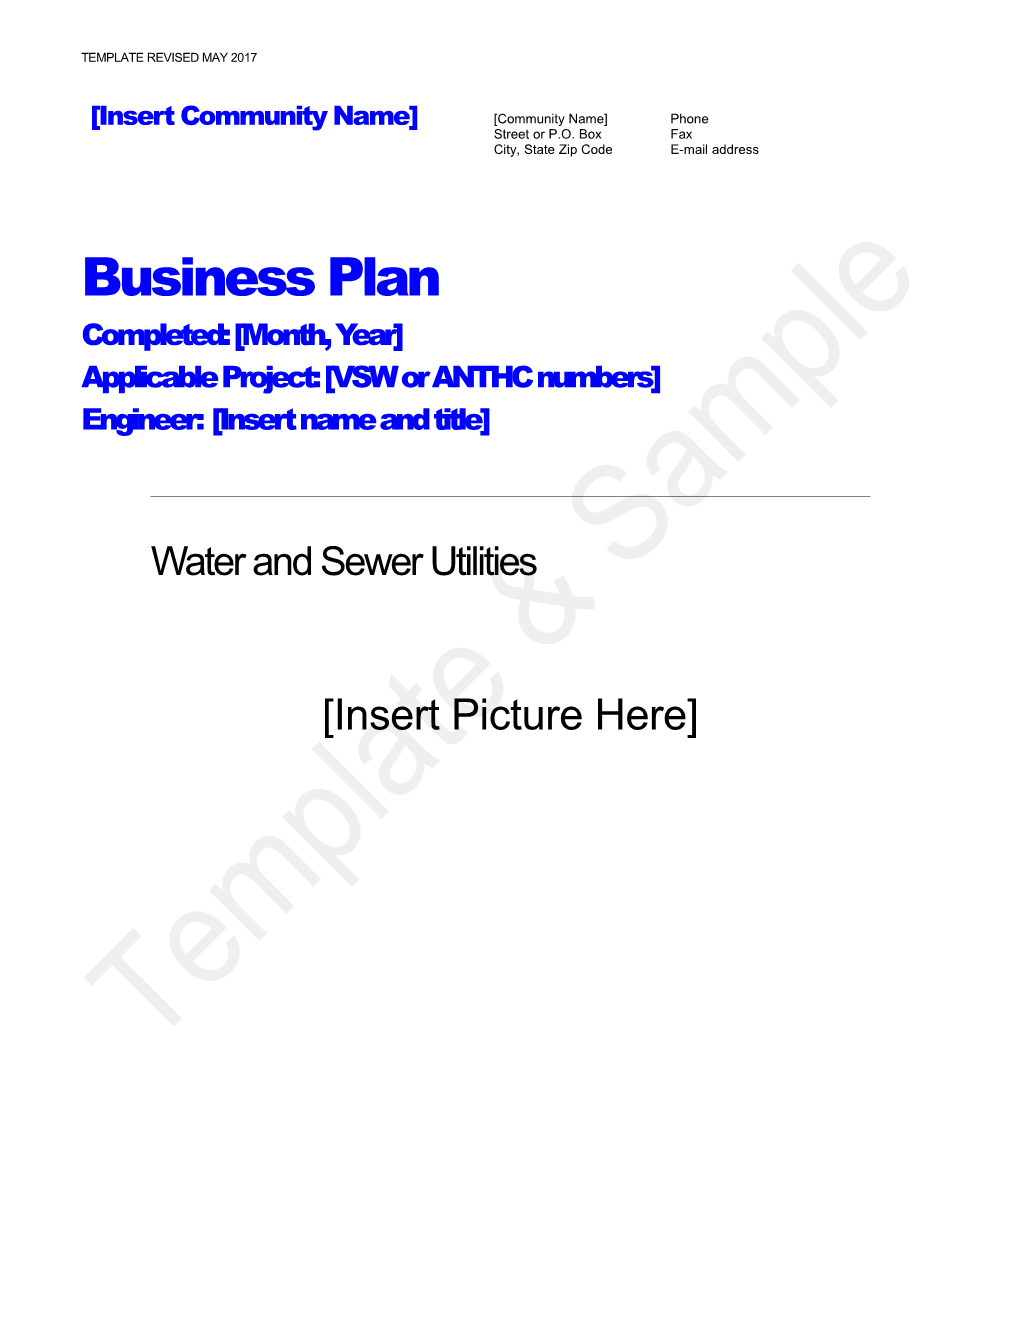 Template for Utilities Business Plan